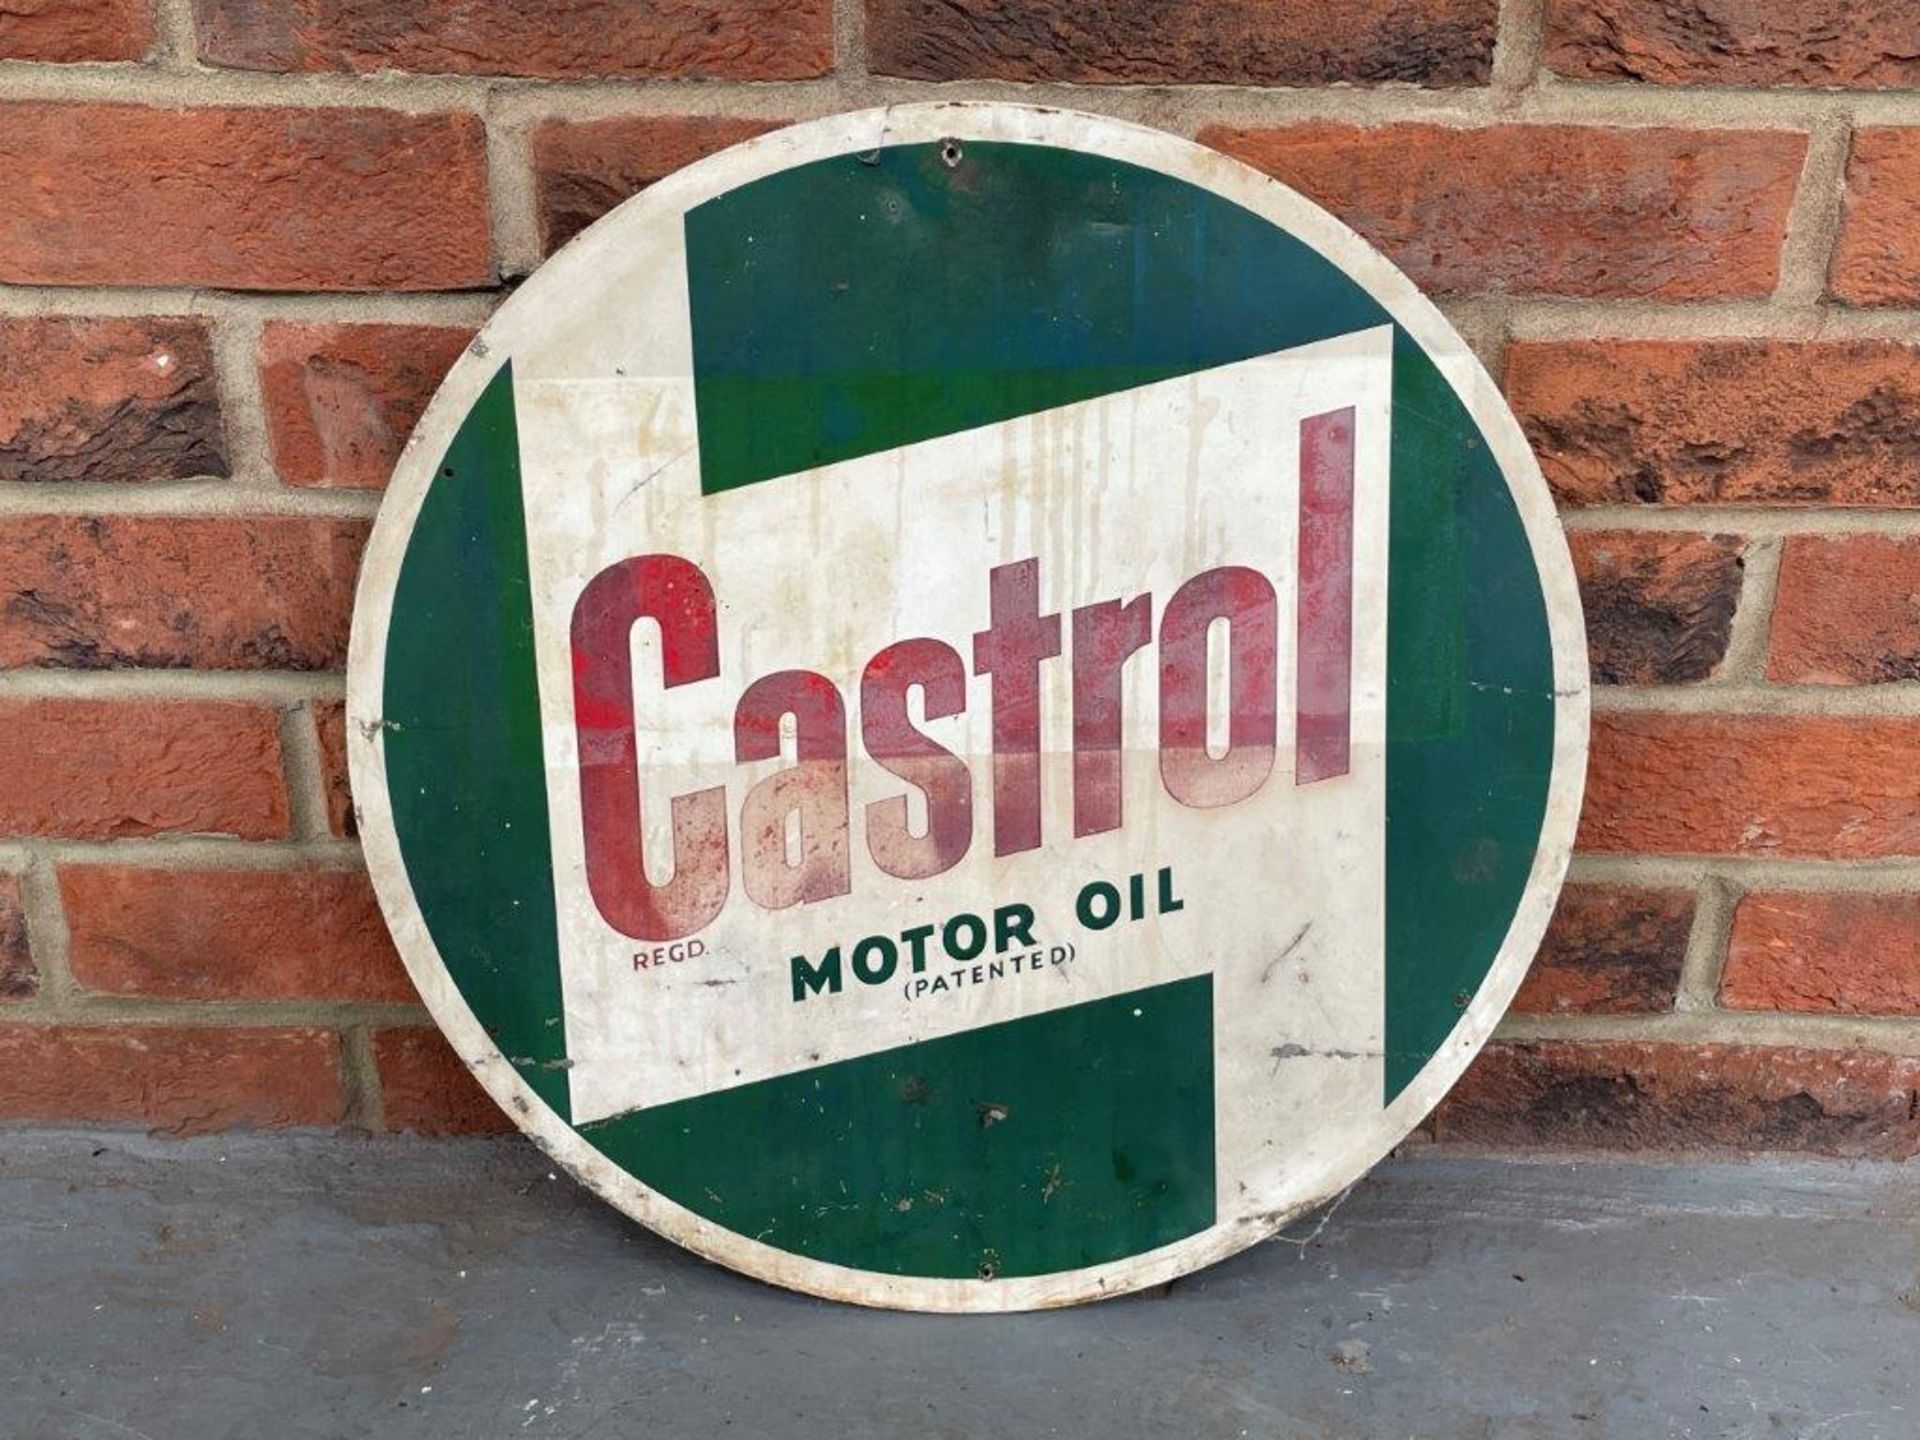 Vintage Castrol Circular Sign by Cowling